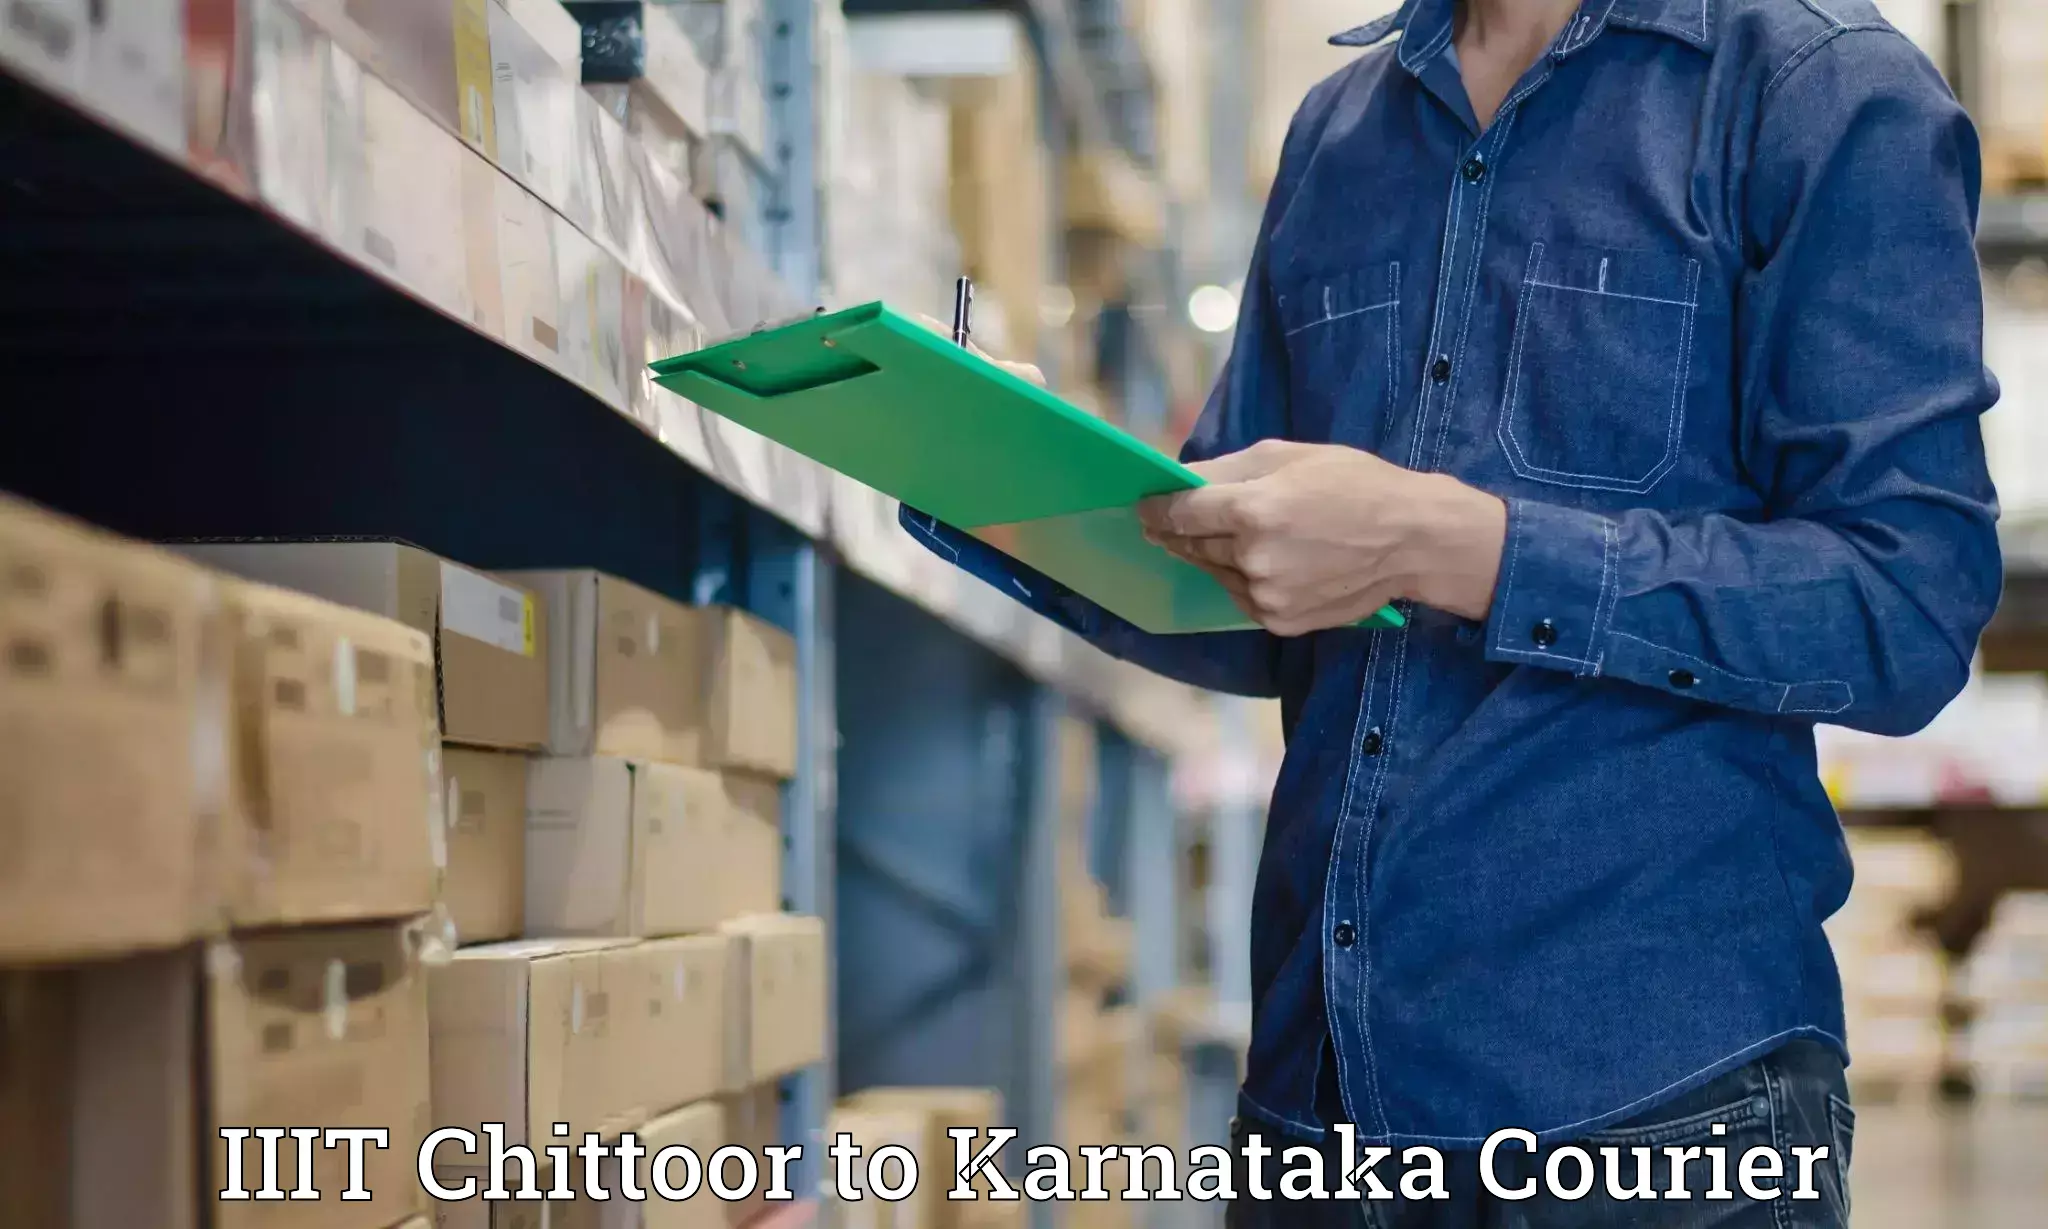 Express logistics providers IIIT Chittoor to University of Agricultural Sciences Dharwad